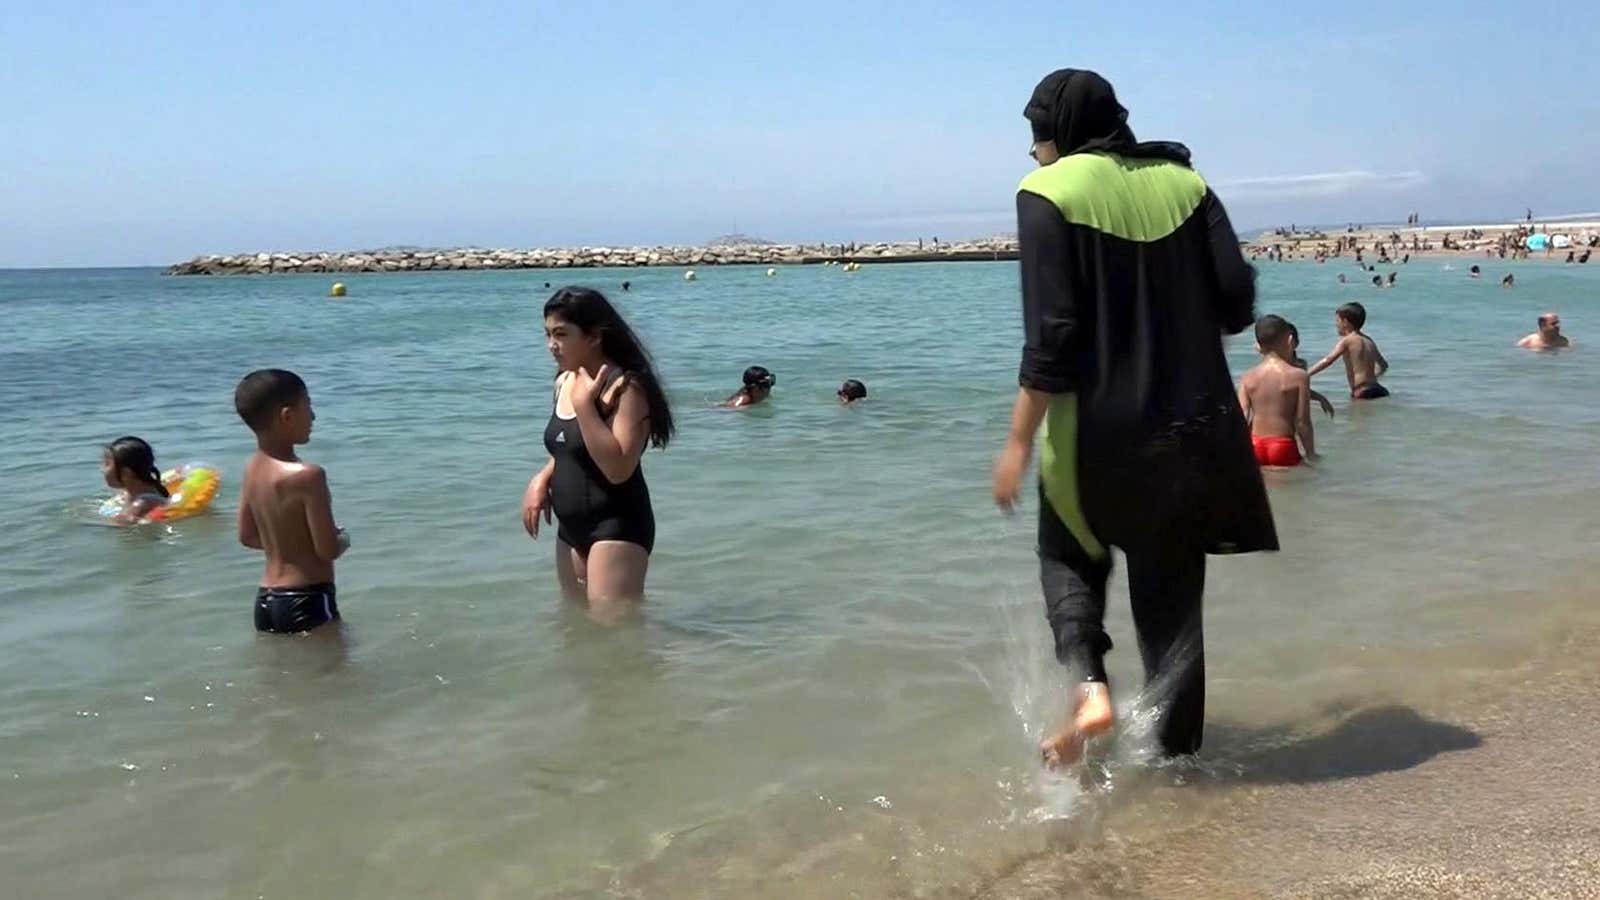 The sun is back—and so is the burkini debate.